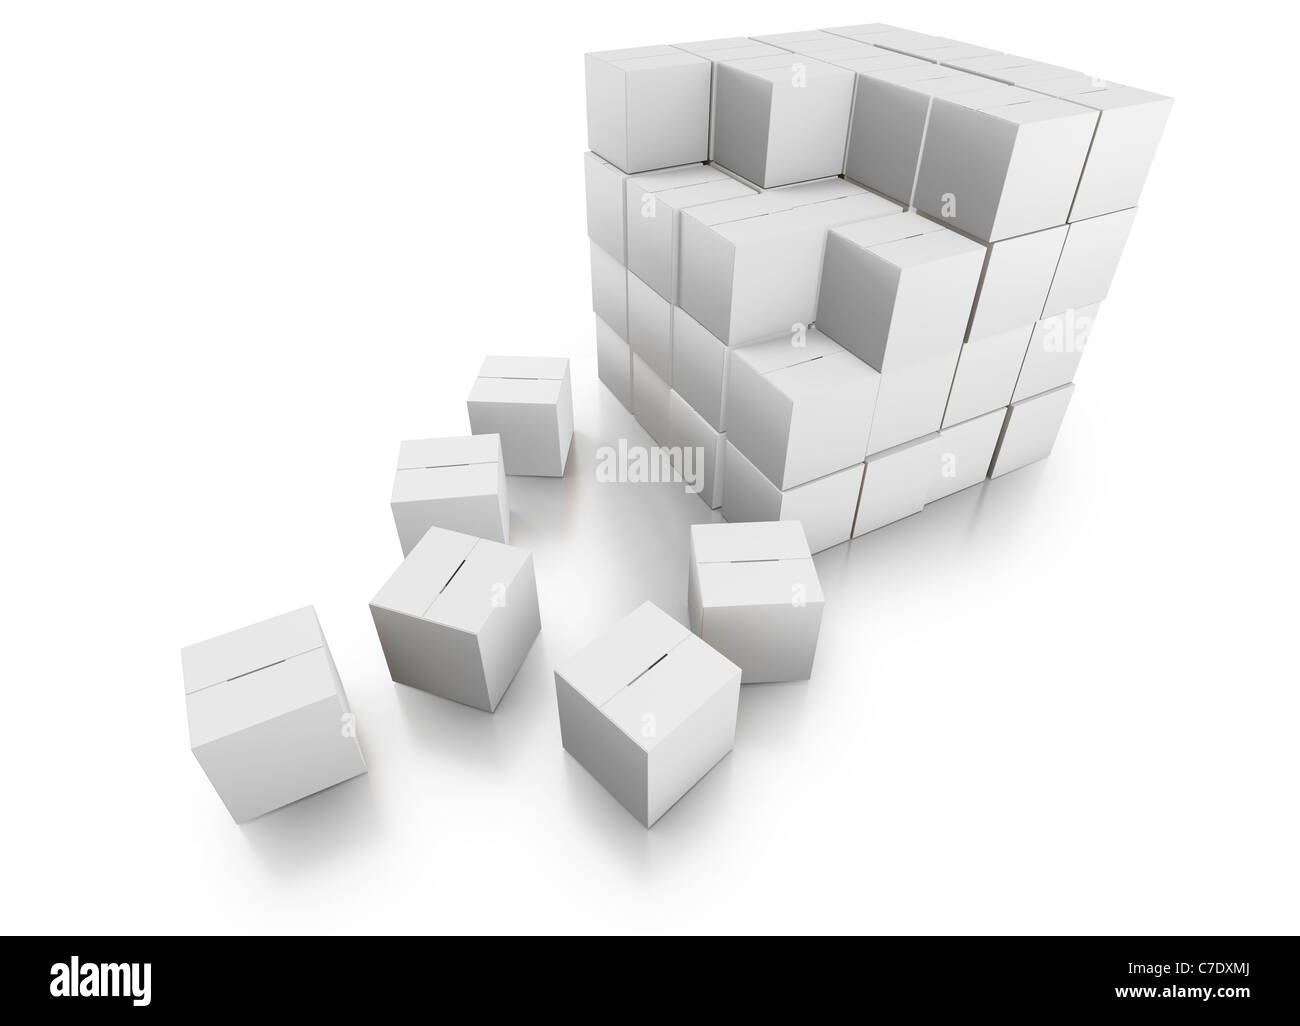 Stacking cardboard boxes in a tdy sack with a white on white theme Stock Photo